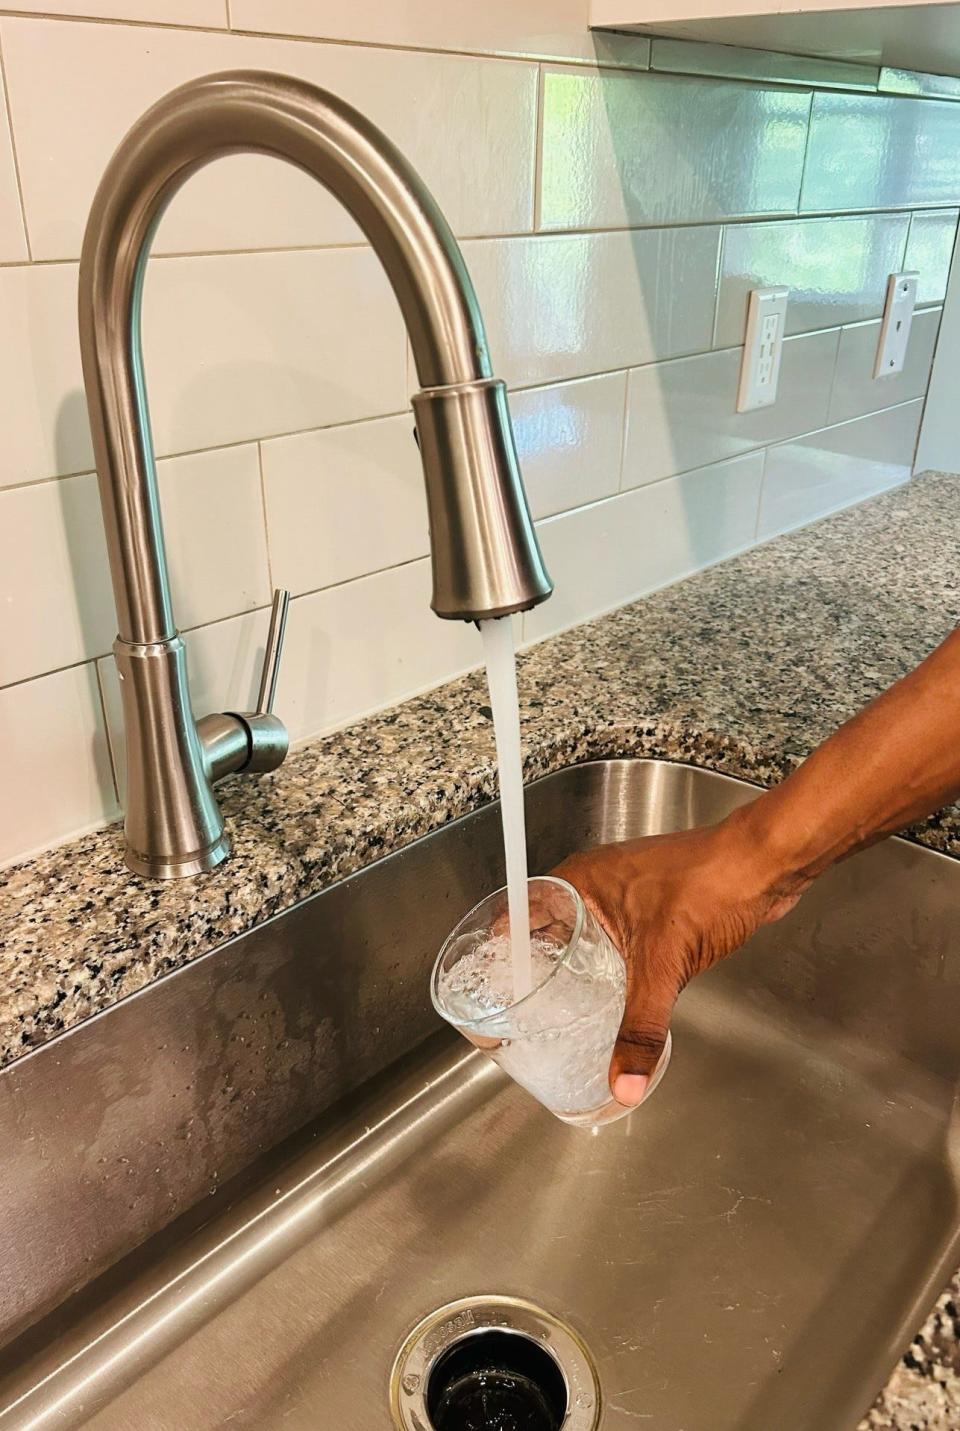 As part of the Buden Administration’s commitment to combating PFAS pollution, the Environmental Protection Agency received $1billion federal funding through to address PFAS in drinking water.